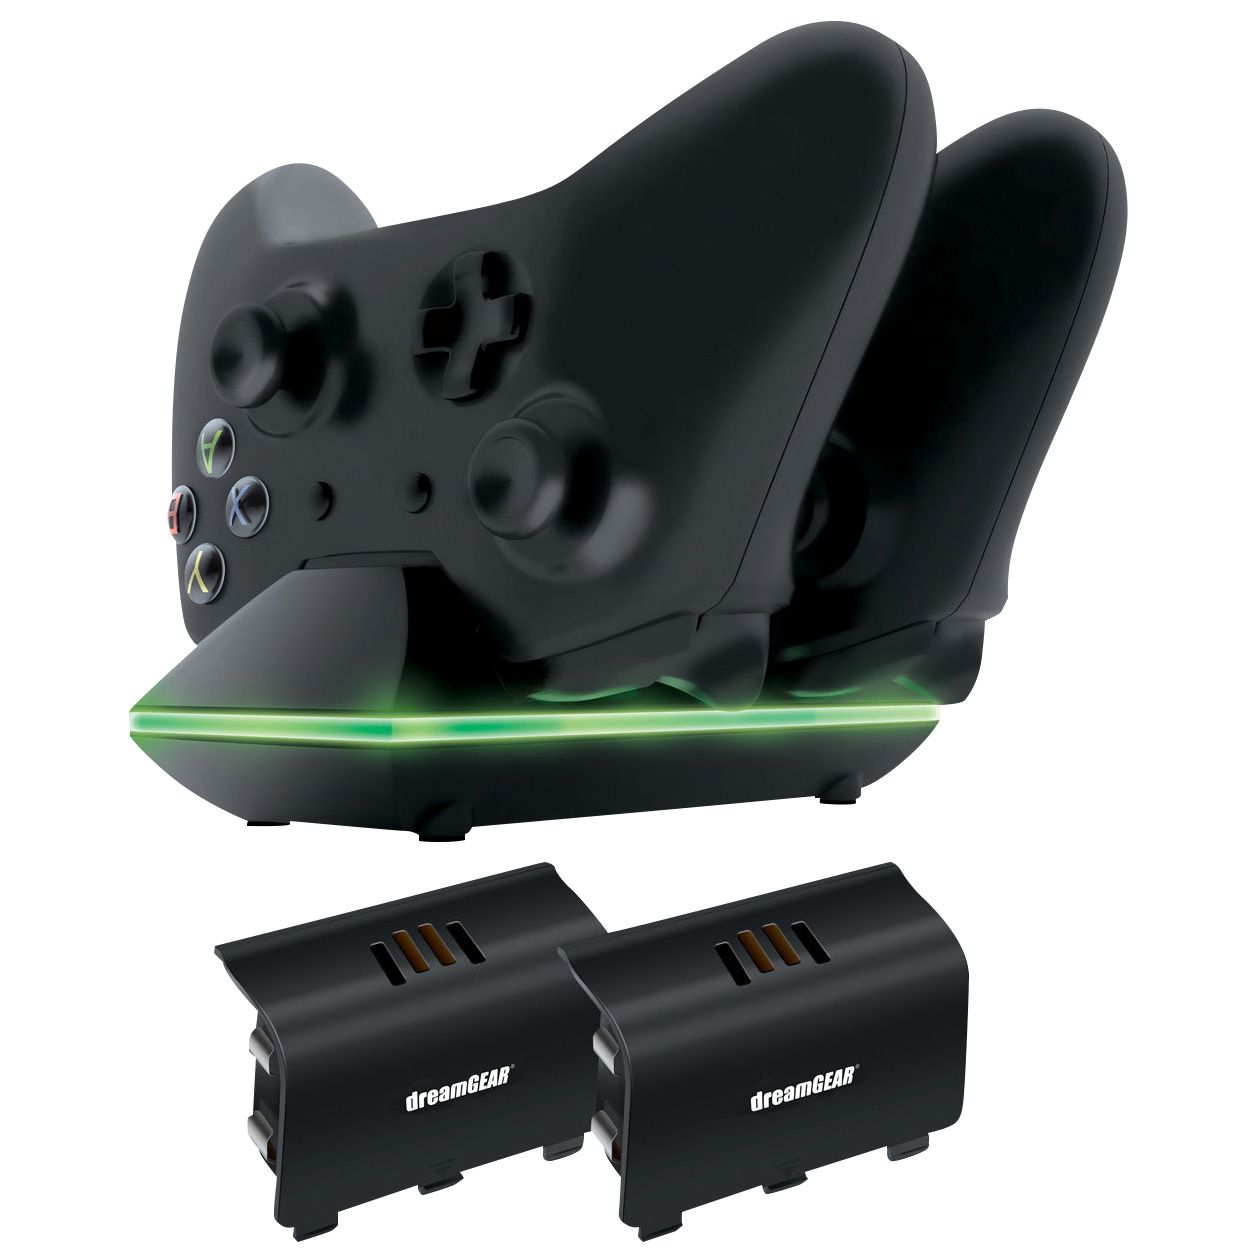 Gamer's Kit for Xbox One® - dreamGEAR